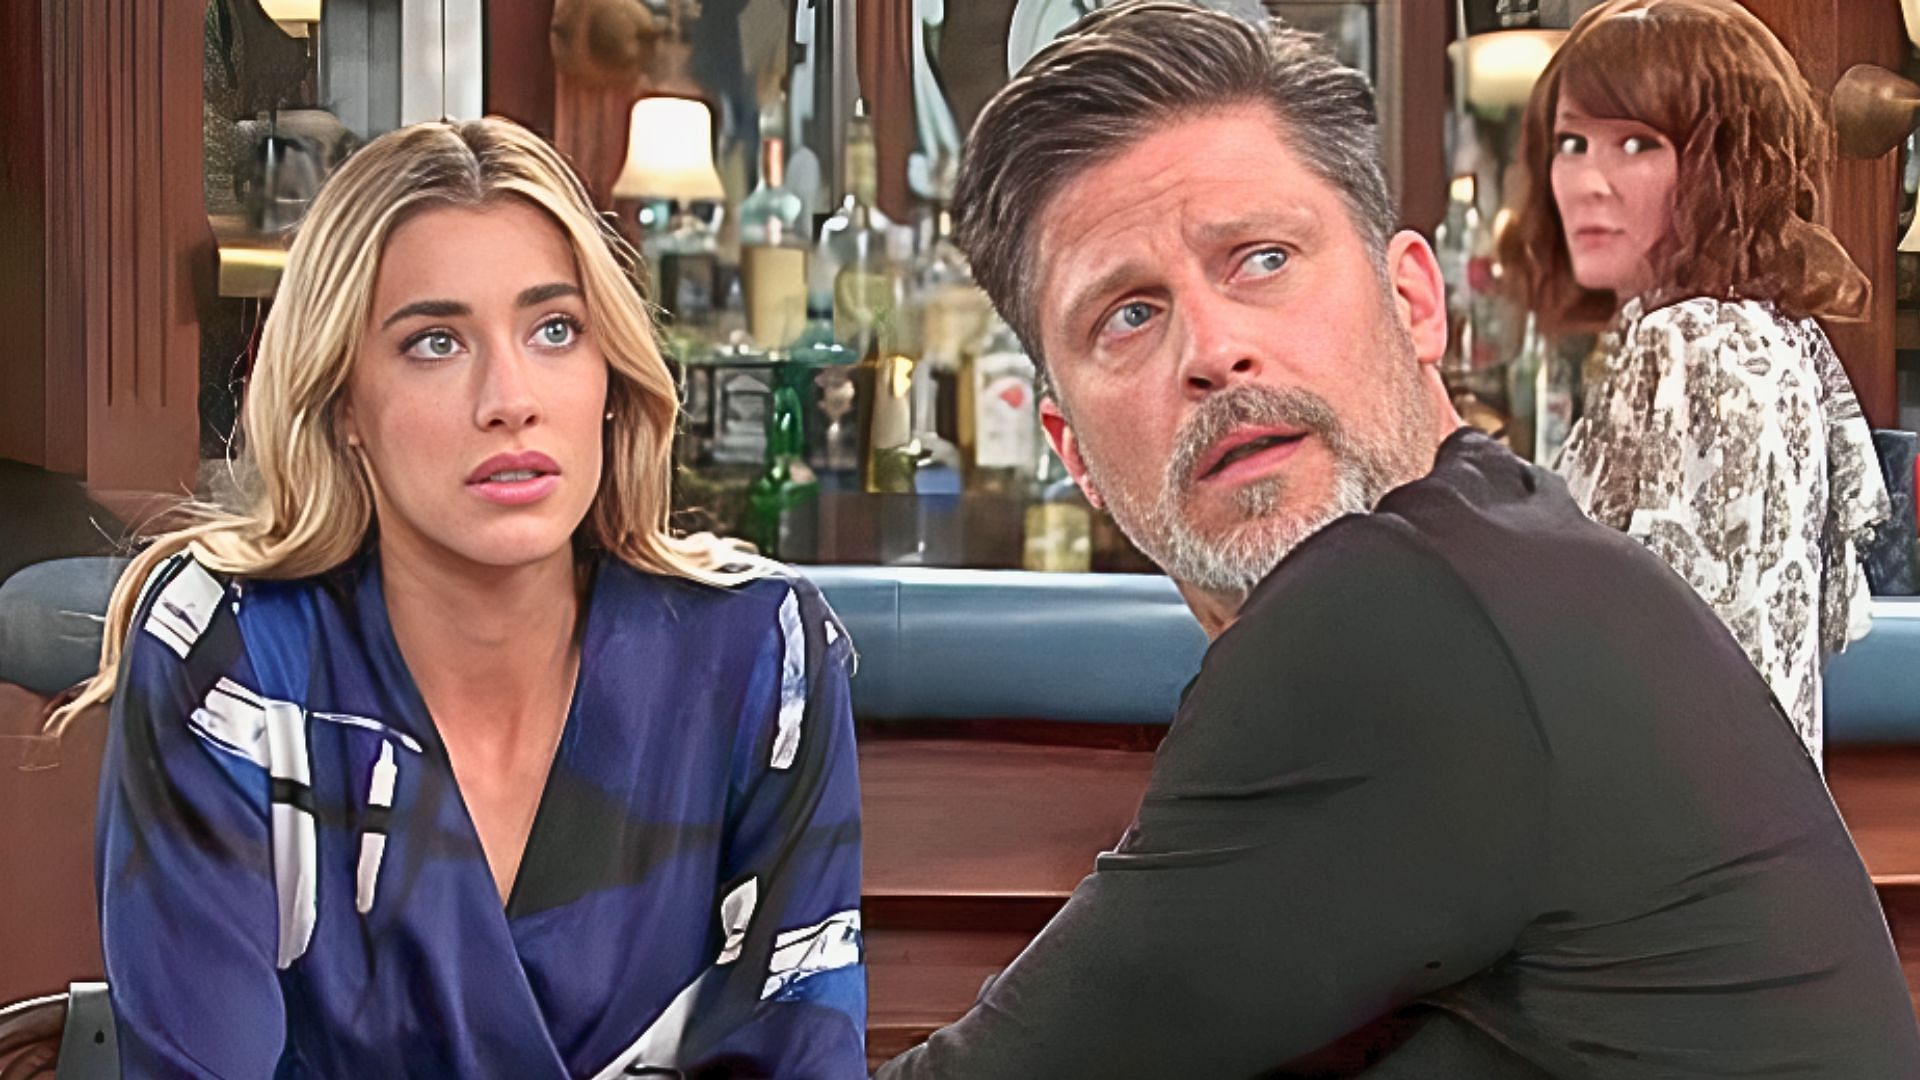  Jessica Serfaty (left) and Greg Vaughan (right) in Days of Our Lives (Image via Peacock)